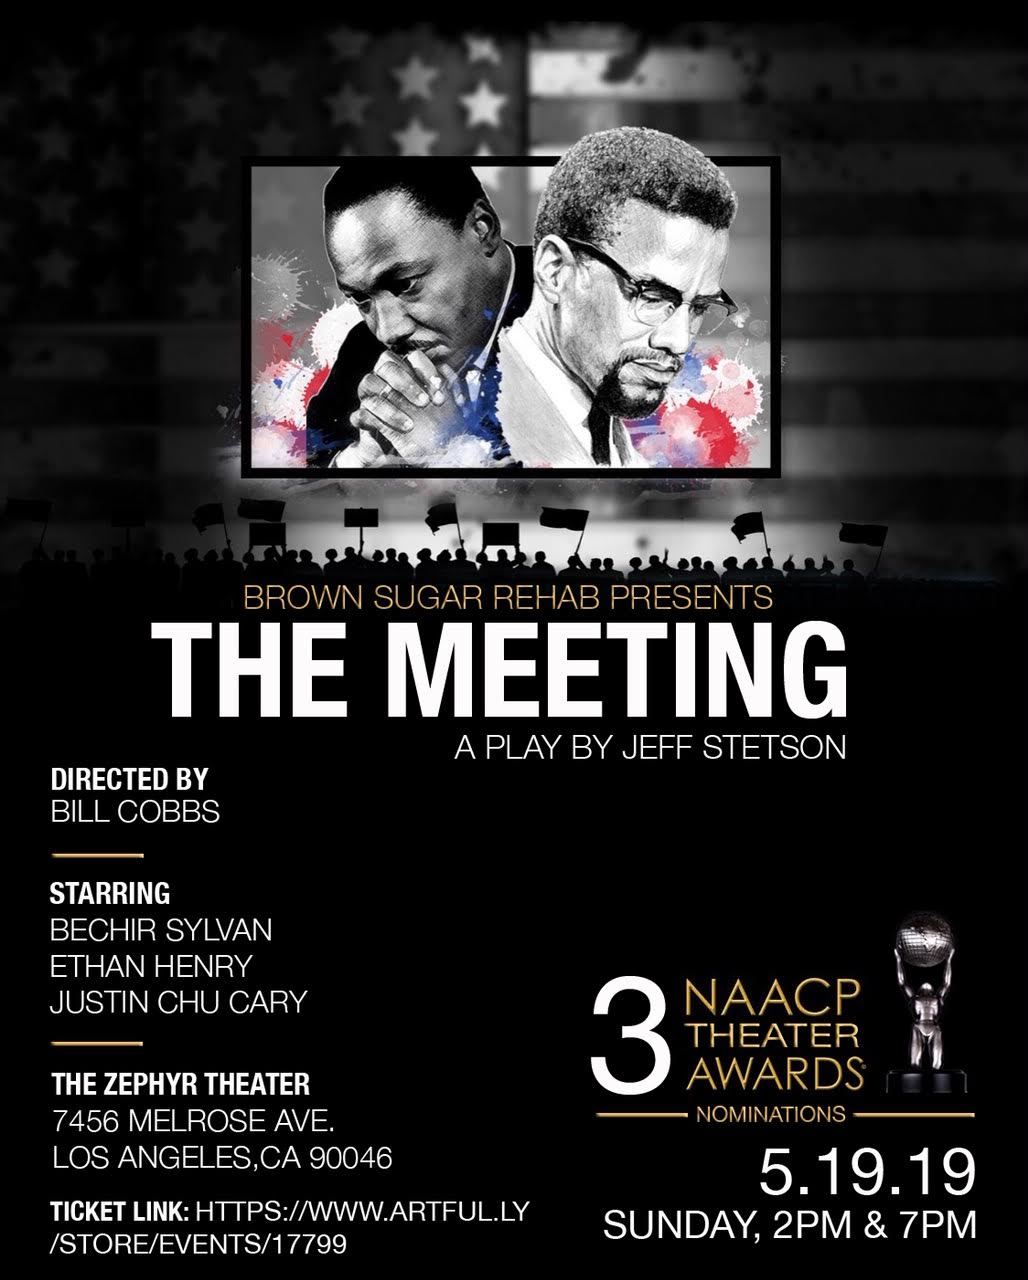 THE MEETING By Jeff Stetson Comes to The Zephyr Theatre 